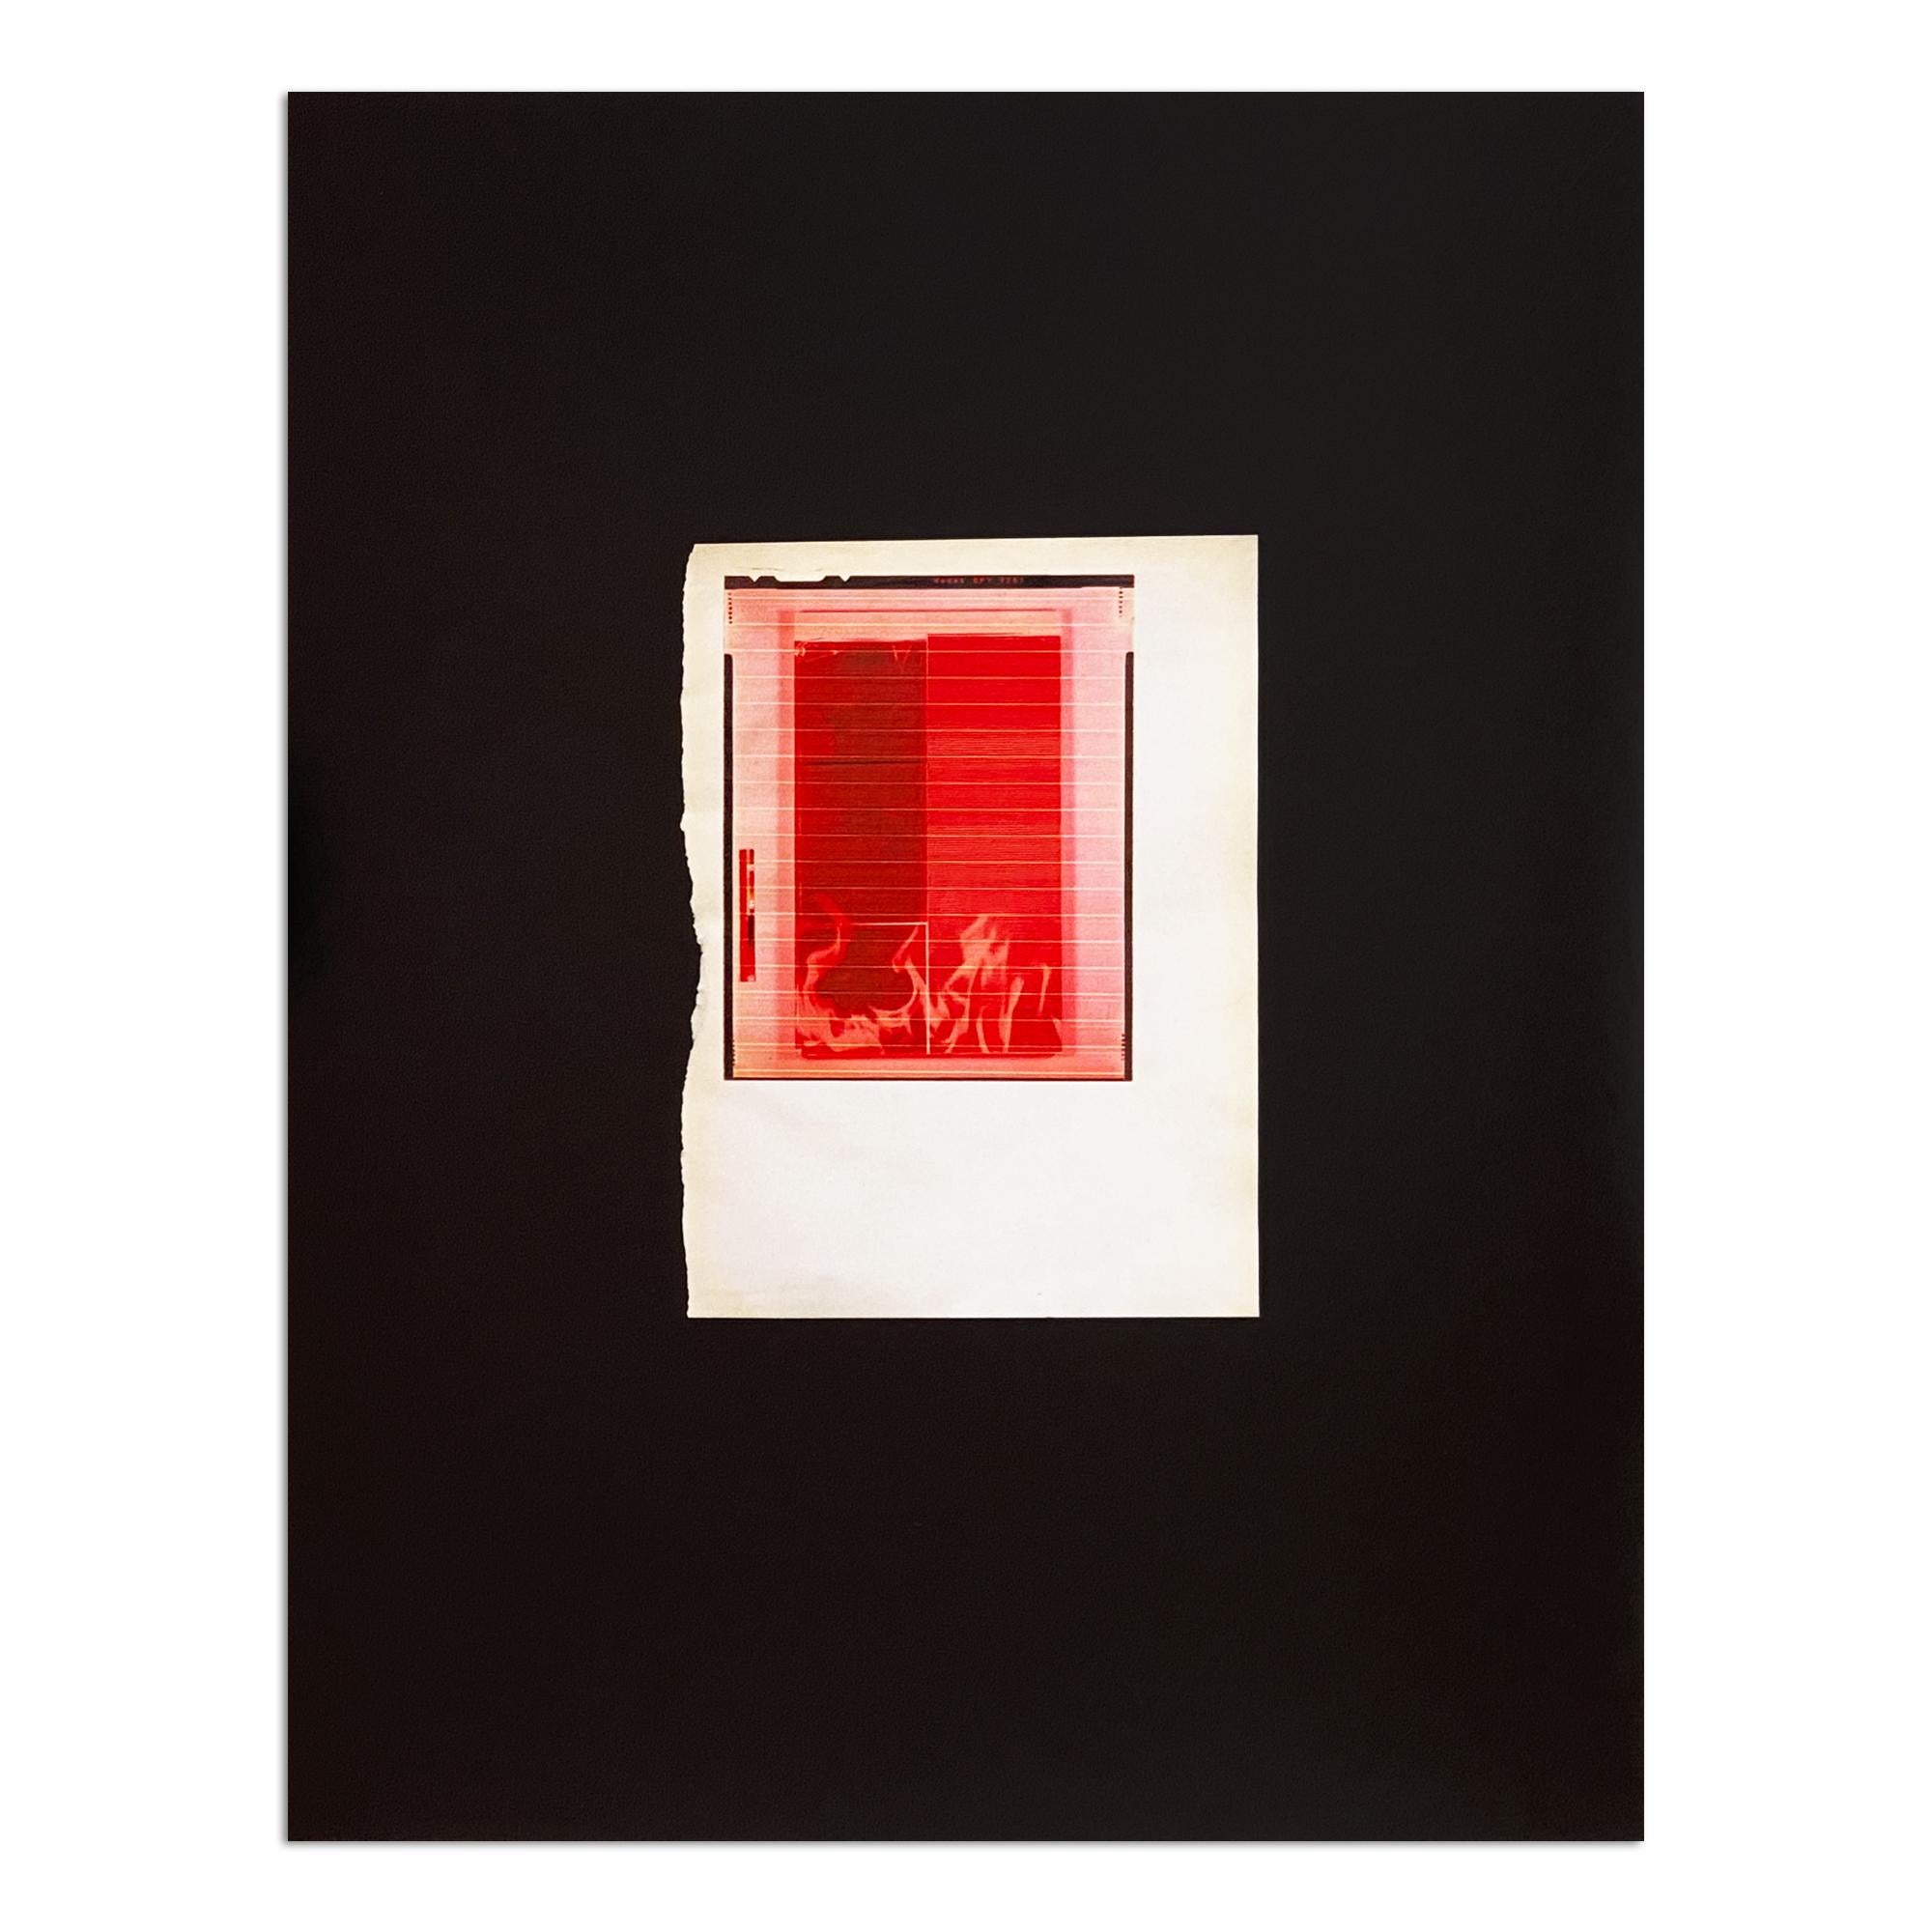 Wade Guyton (American, b. 1972)
Red Fire for SMC, 2018
Medium: Epson Ultrachrome HDX print on coated fine art paper
Dimensions: 19 x 15 in (48 x 38 cm)
Edition of 100 + 10 AP: Hand signed and numbered
Condition: Mint (sold unframed)